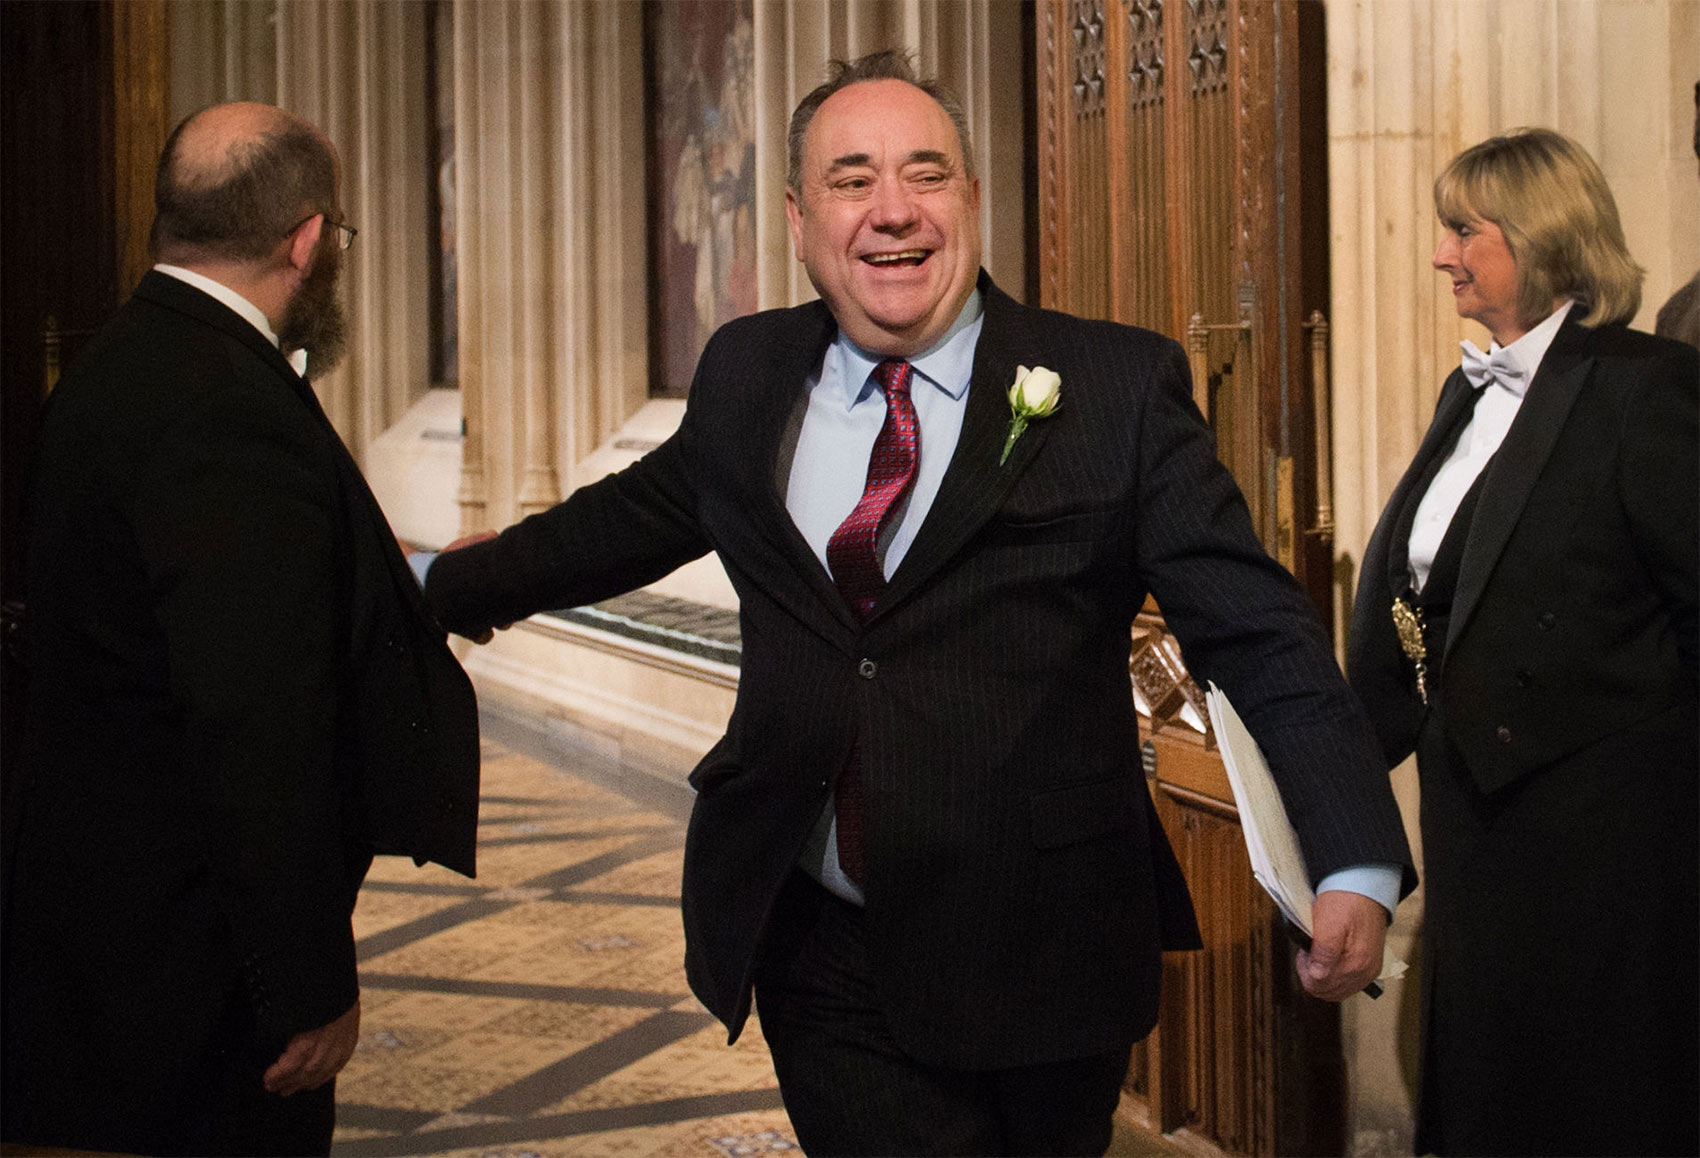 Alex Salmond arrives for the State Opening of Parliament, May 27th, 2015